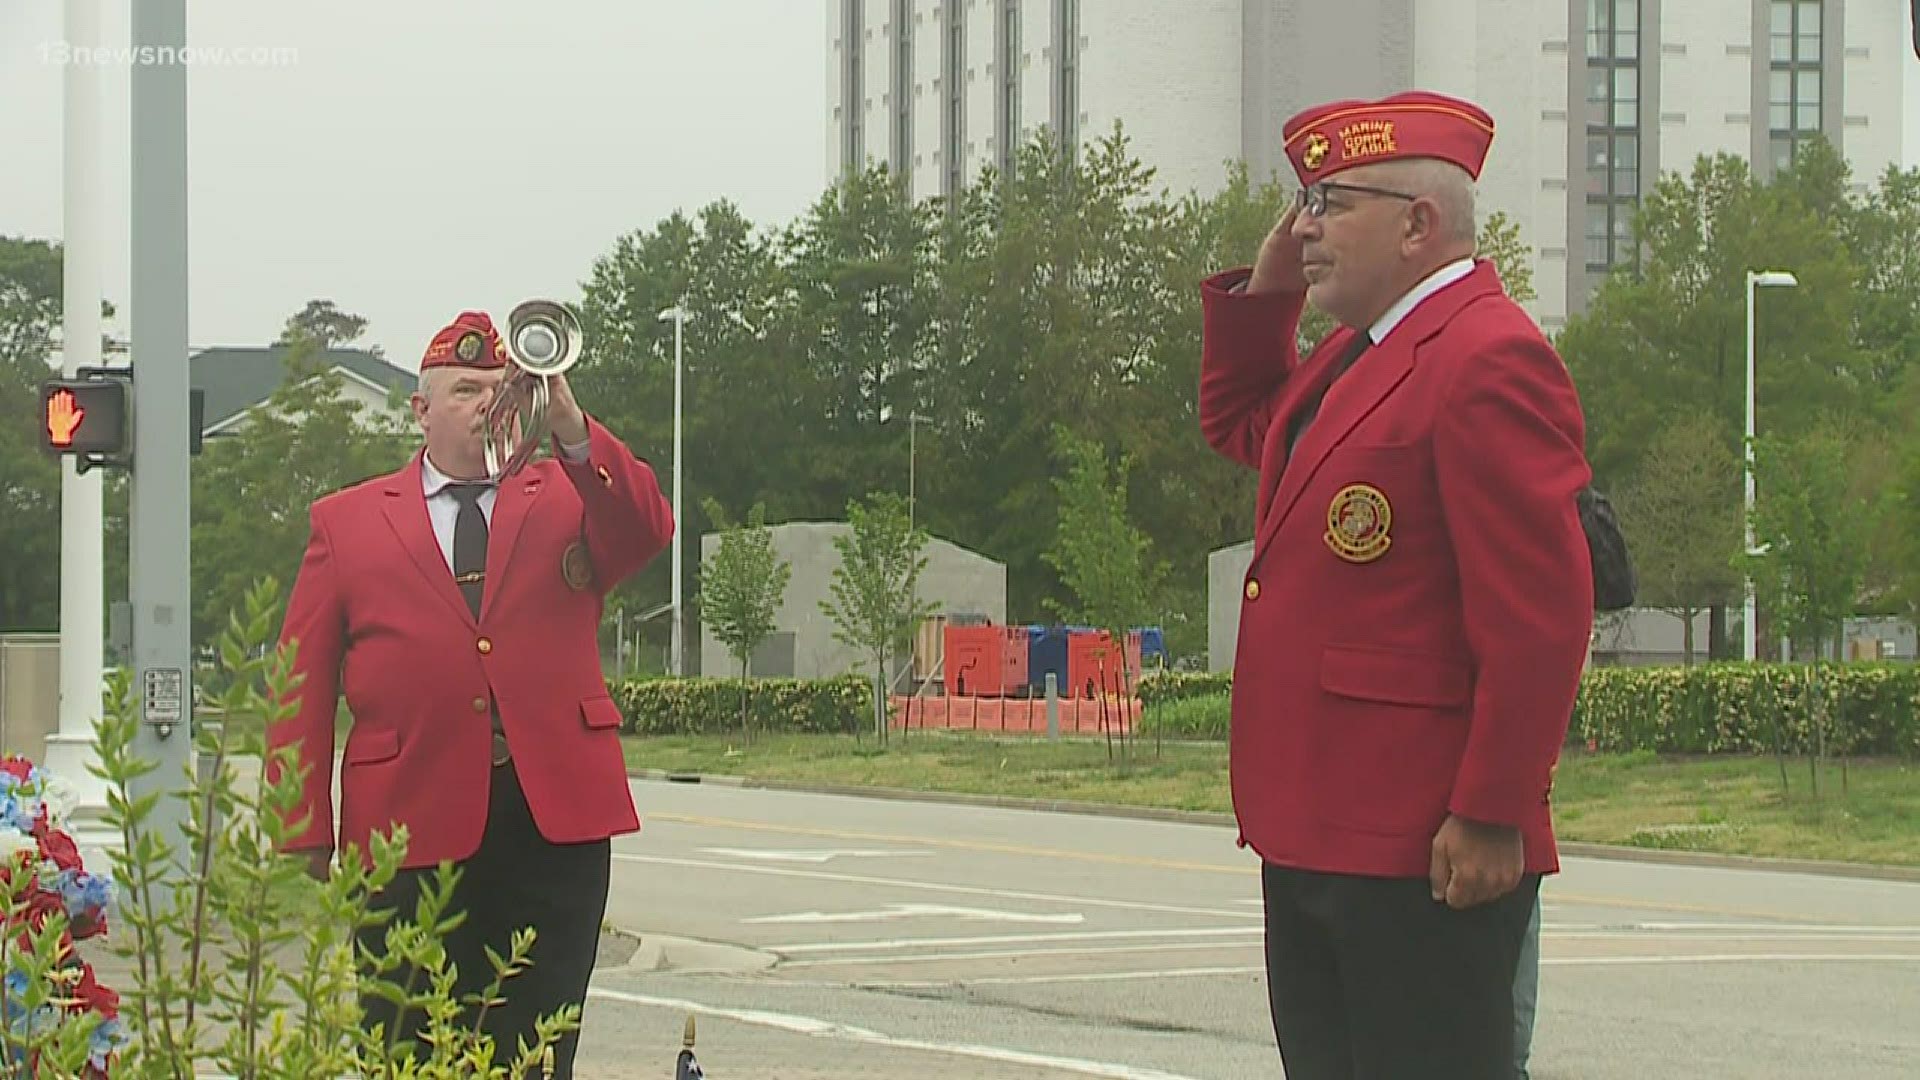 Veteran groups came out to Veterans Memorial Park to honor fallen soldiers on Memorial Day, even if coronavirus changed how this 2020's ceremony looked.